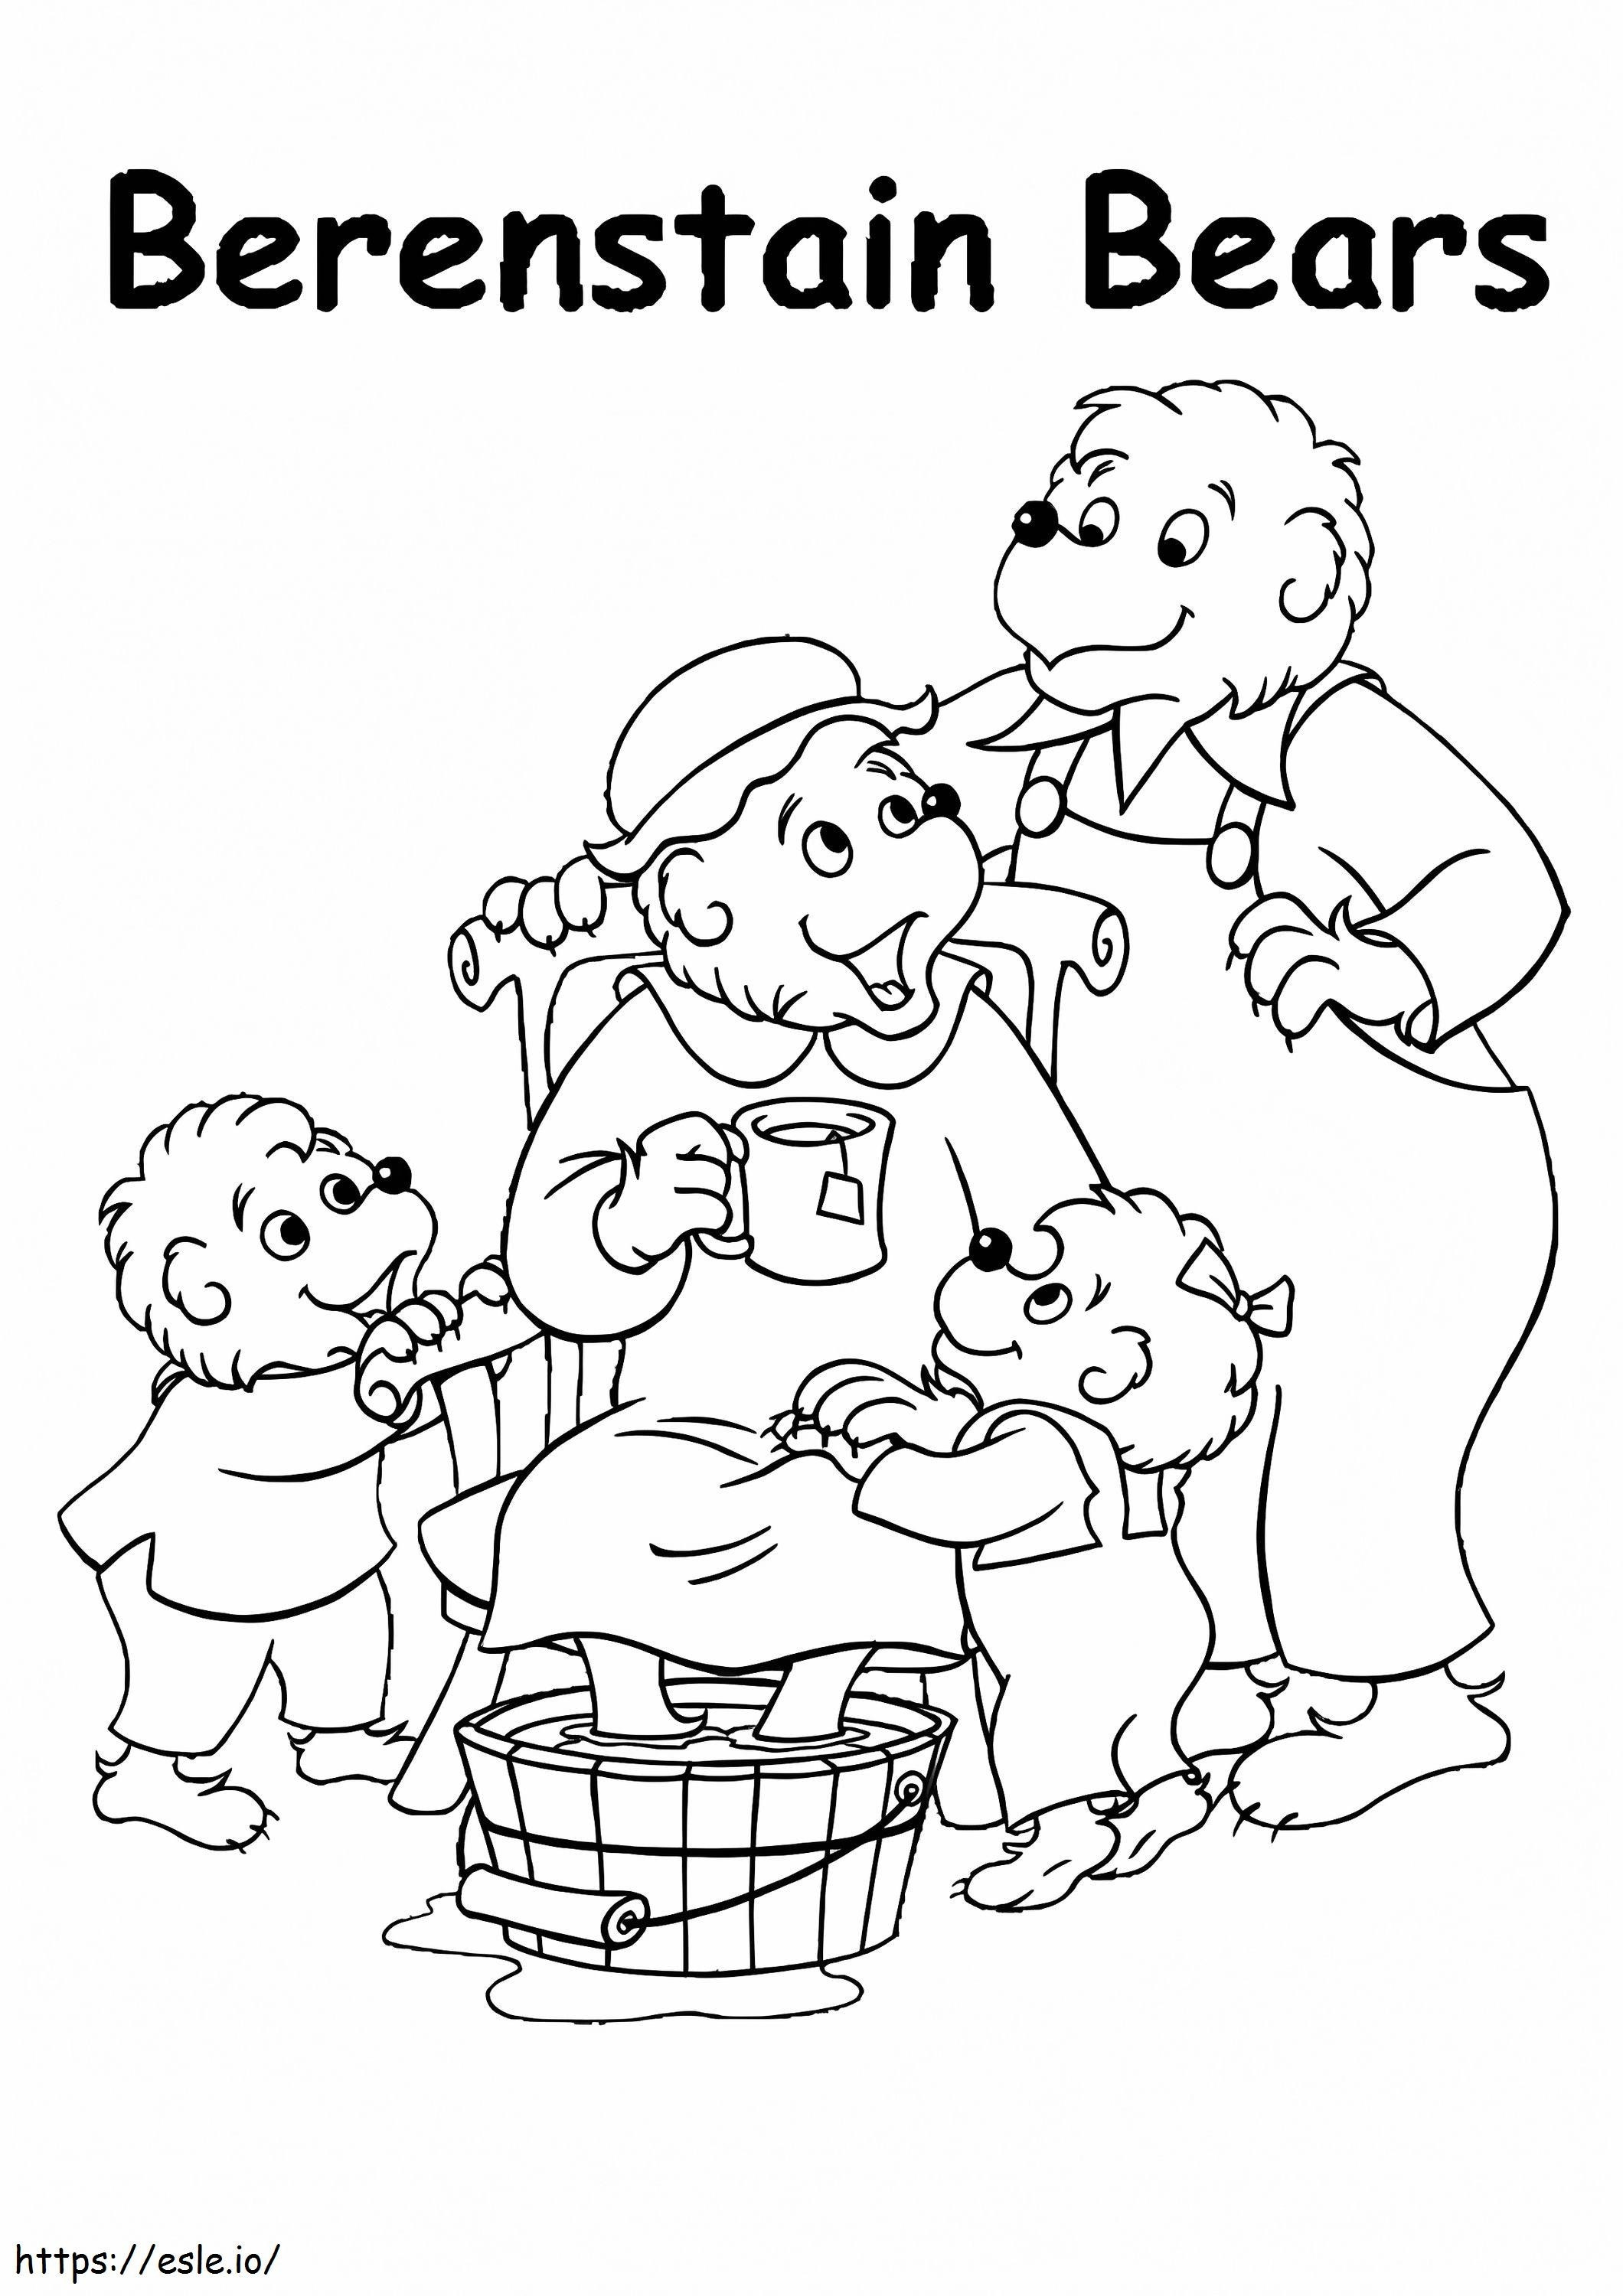 Berenstain Bears And Family coloring page